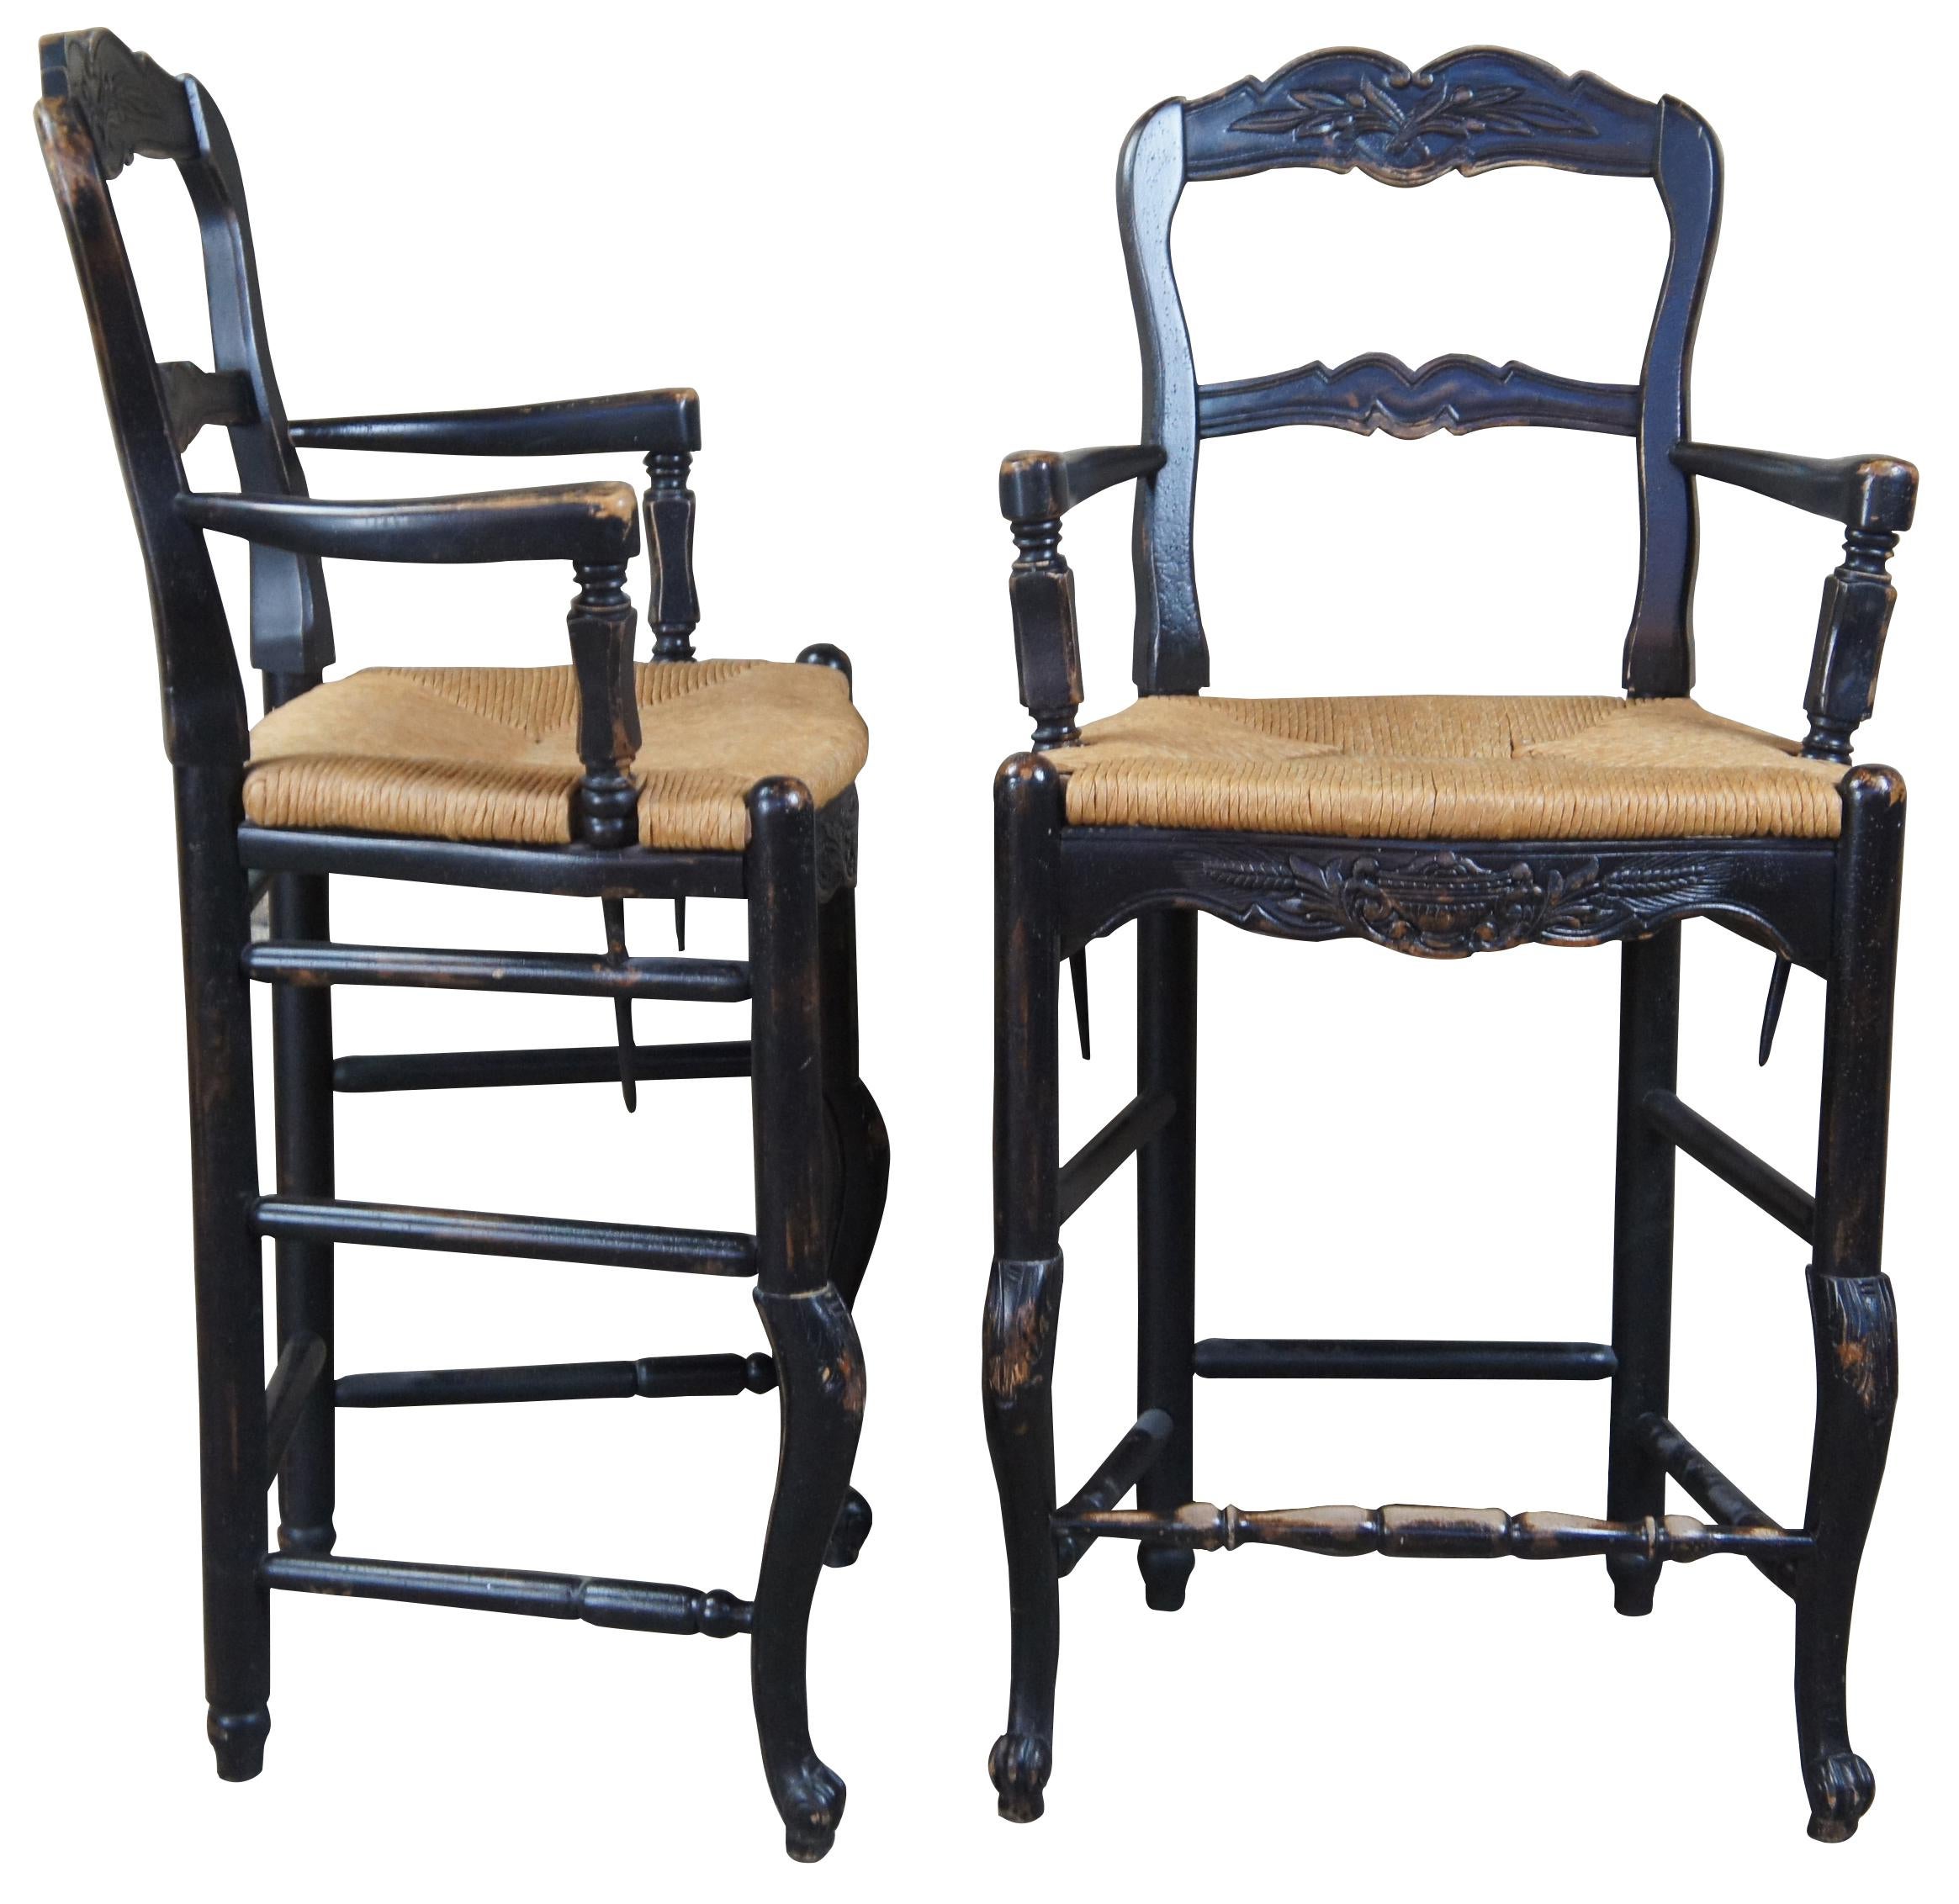 Two vintage Country French oak ladder back bar stools. Feature woven rush seats, carved floral and trophy urn elements and (Provincial inspired) cabriole legs with scrolled feet. Includes lower foot rest. Measure: 41